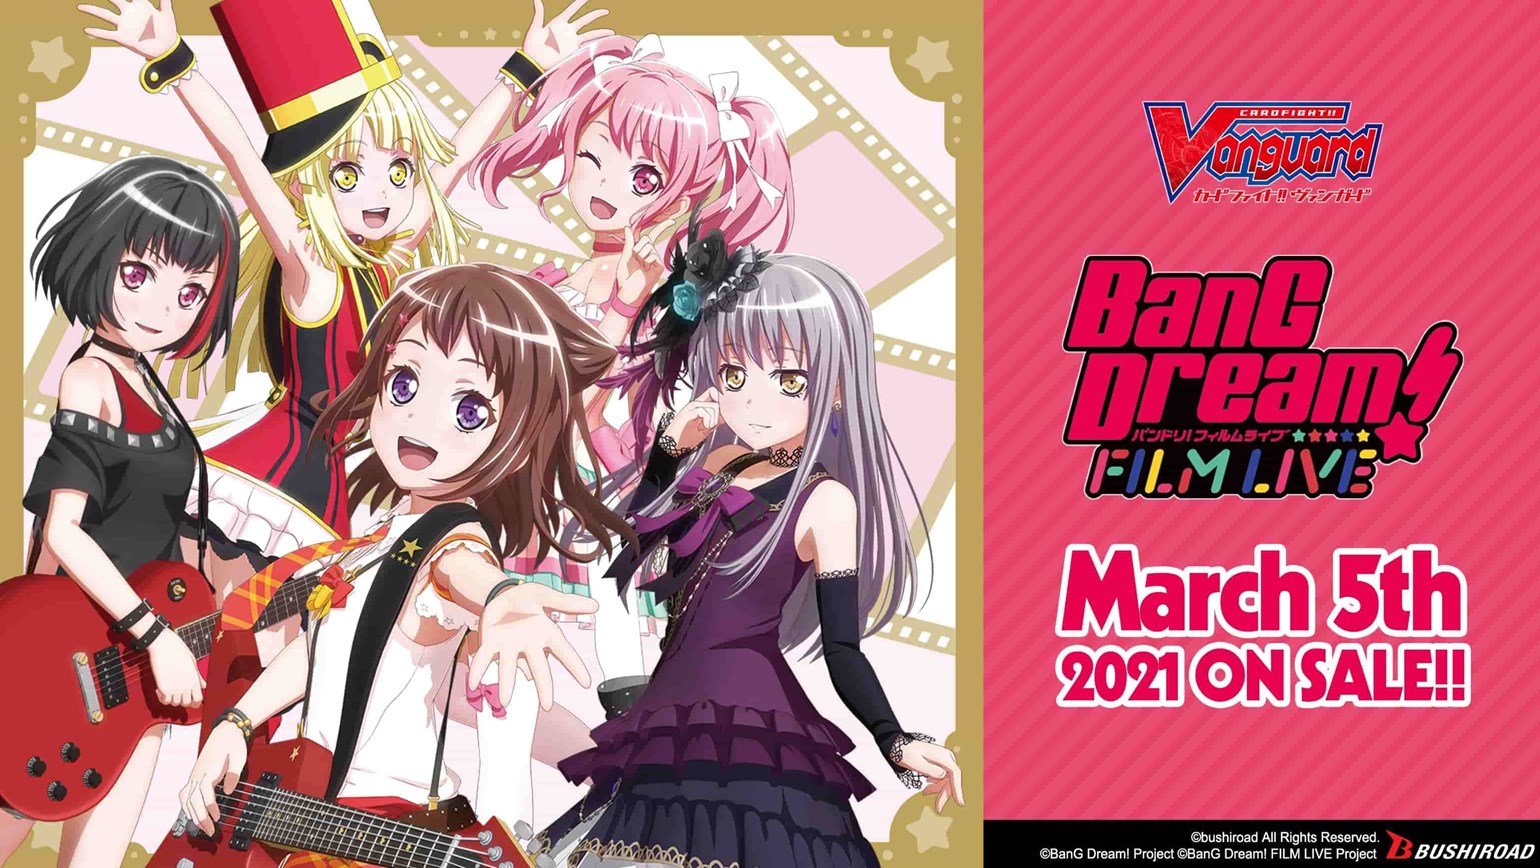 New English Edition Title Booster Vol. 1: BanG Dream! FILM LIVE is Coming to Stores on March 5th!